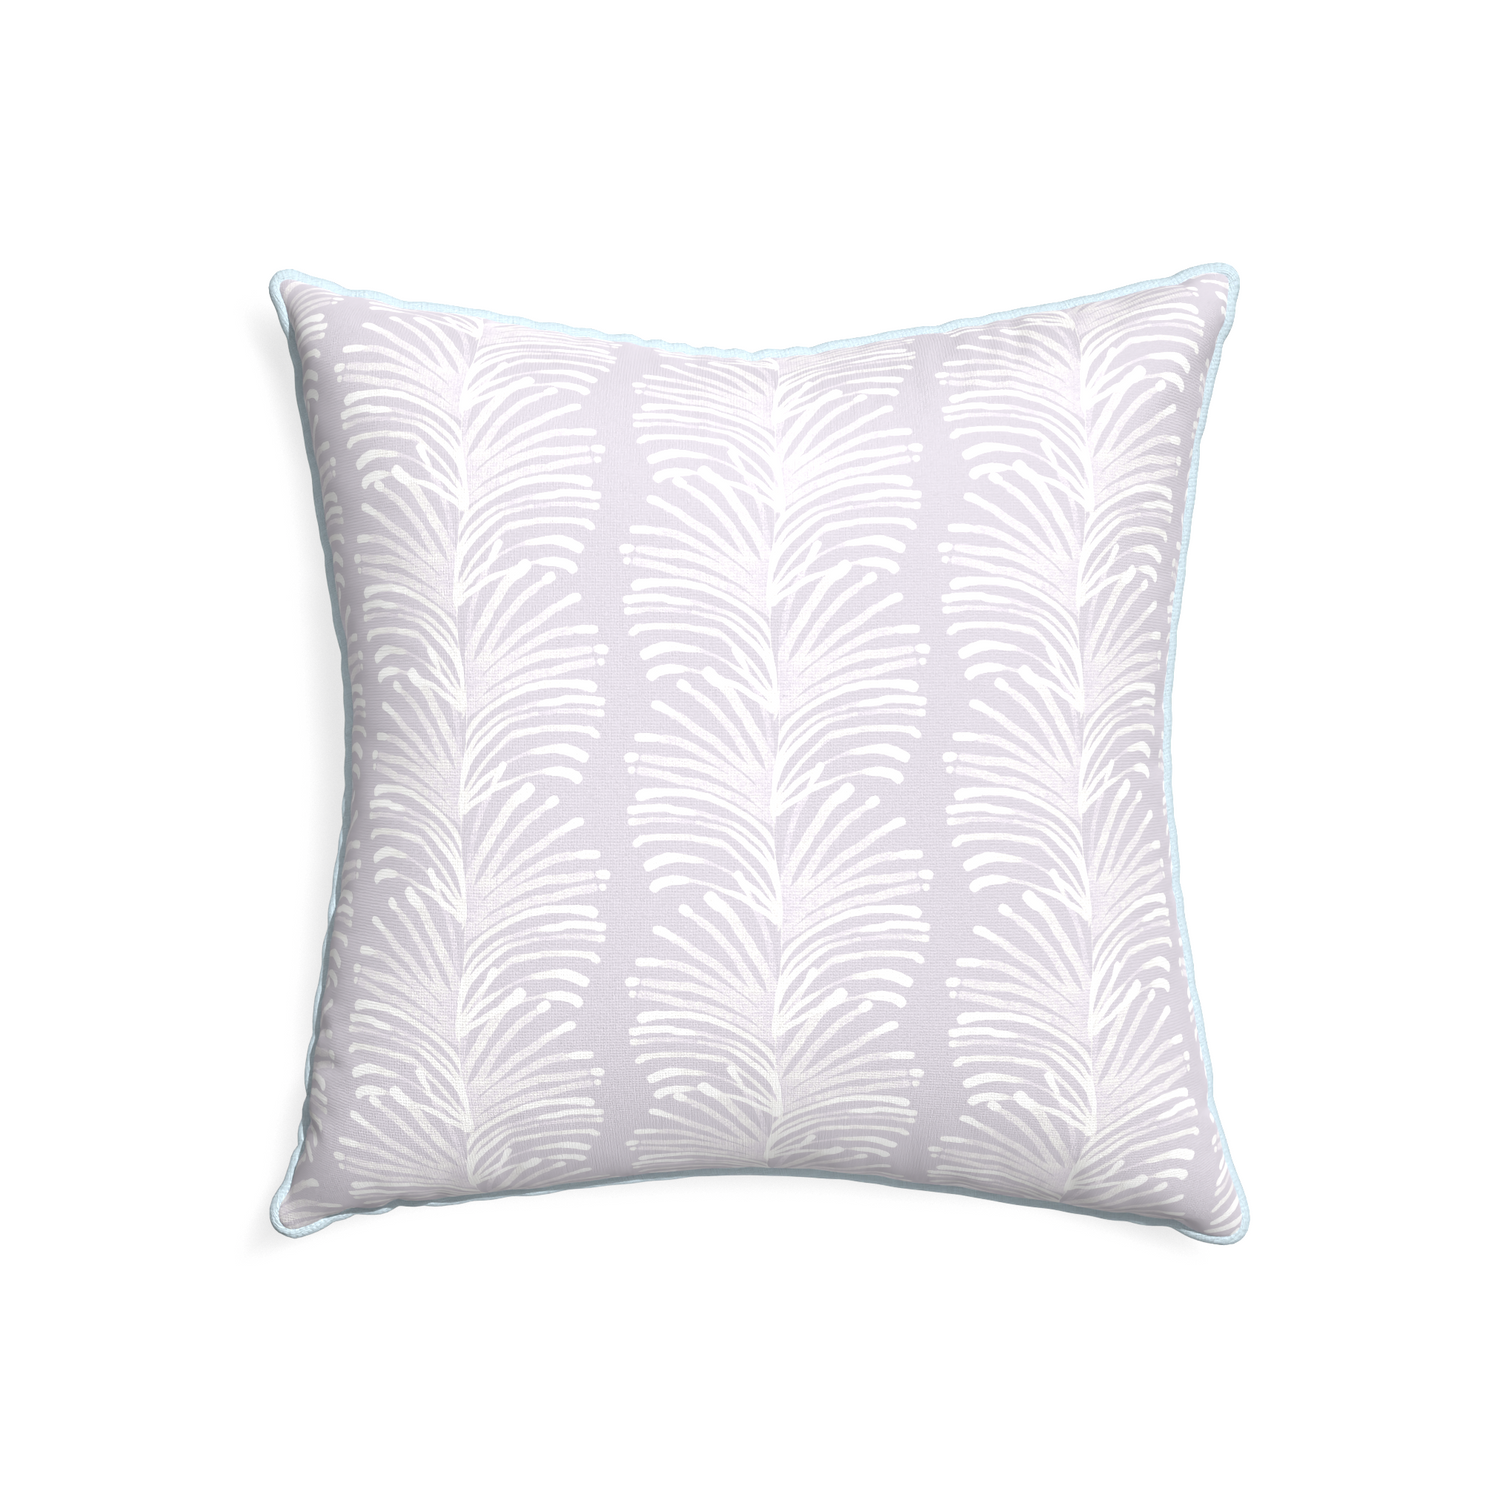 22-square emma lavender custom lavender botanical stripepillow with powder piping on white background